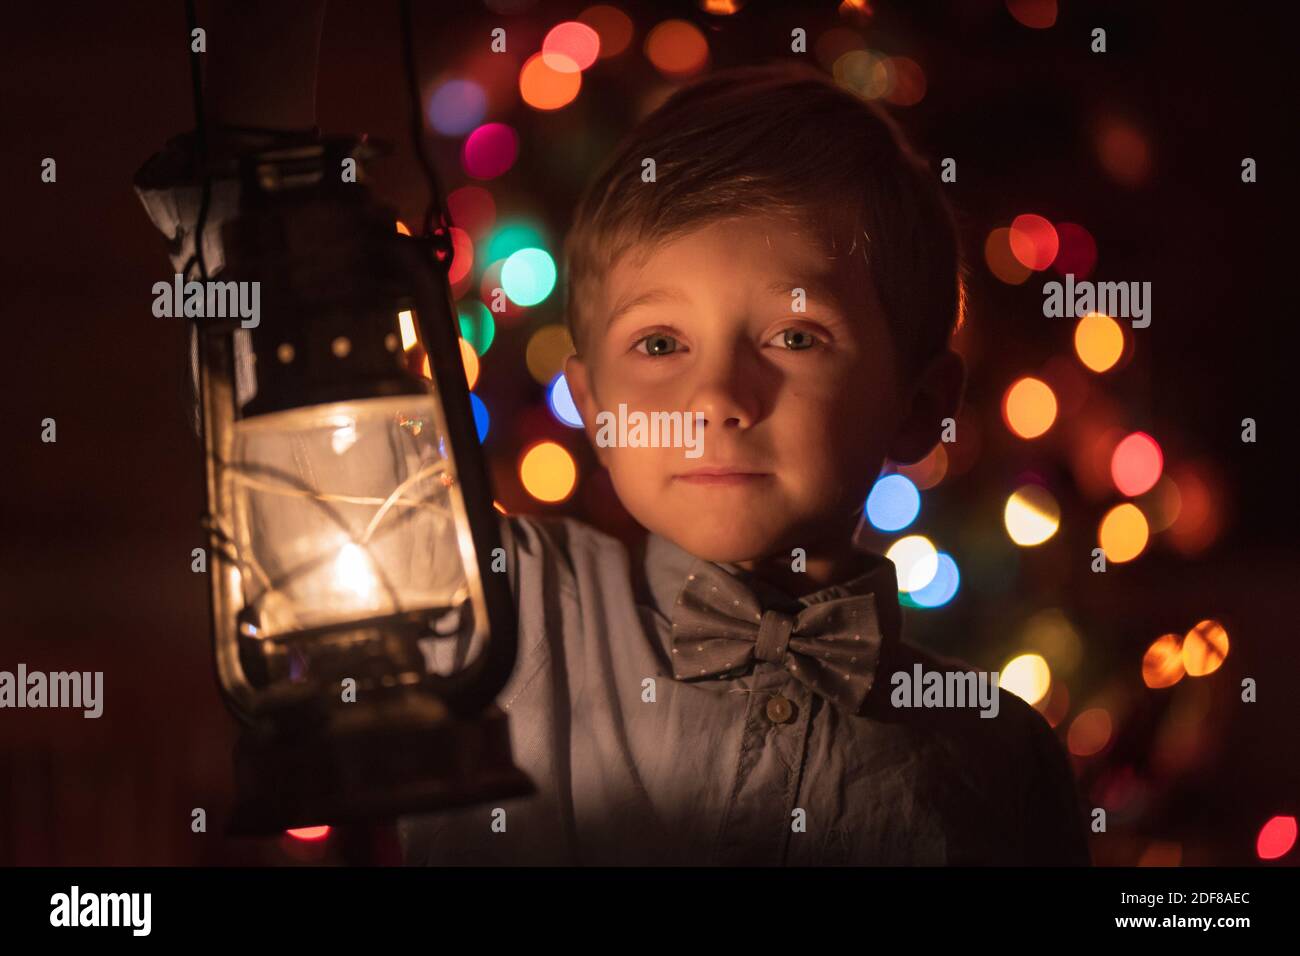 Portrait of 6 years old with oil lamp and Christmas tree in the background Stock Photo